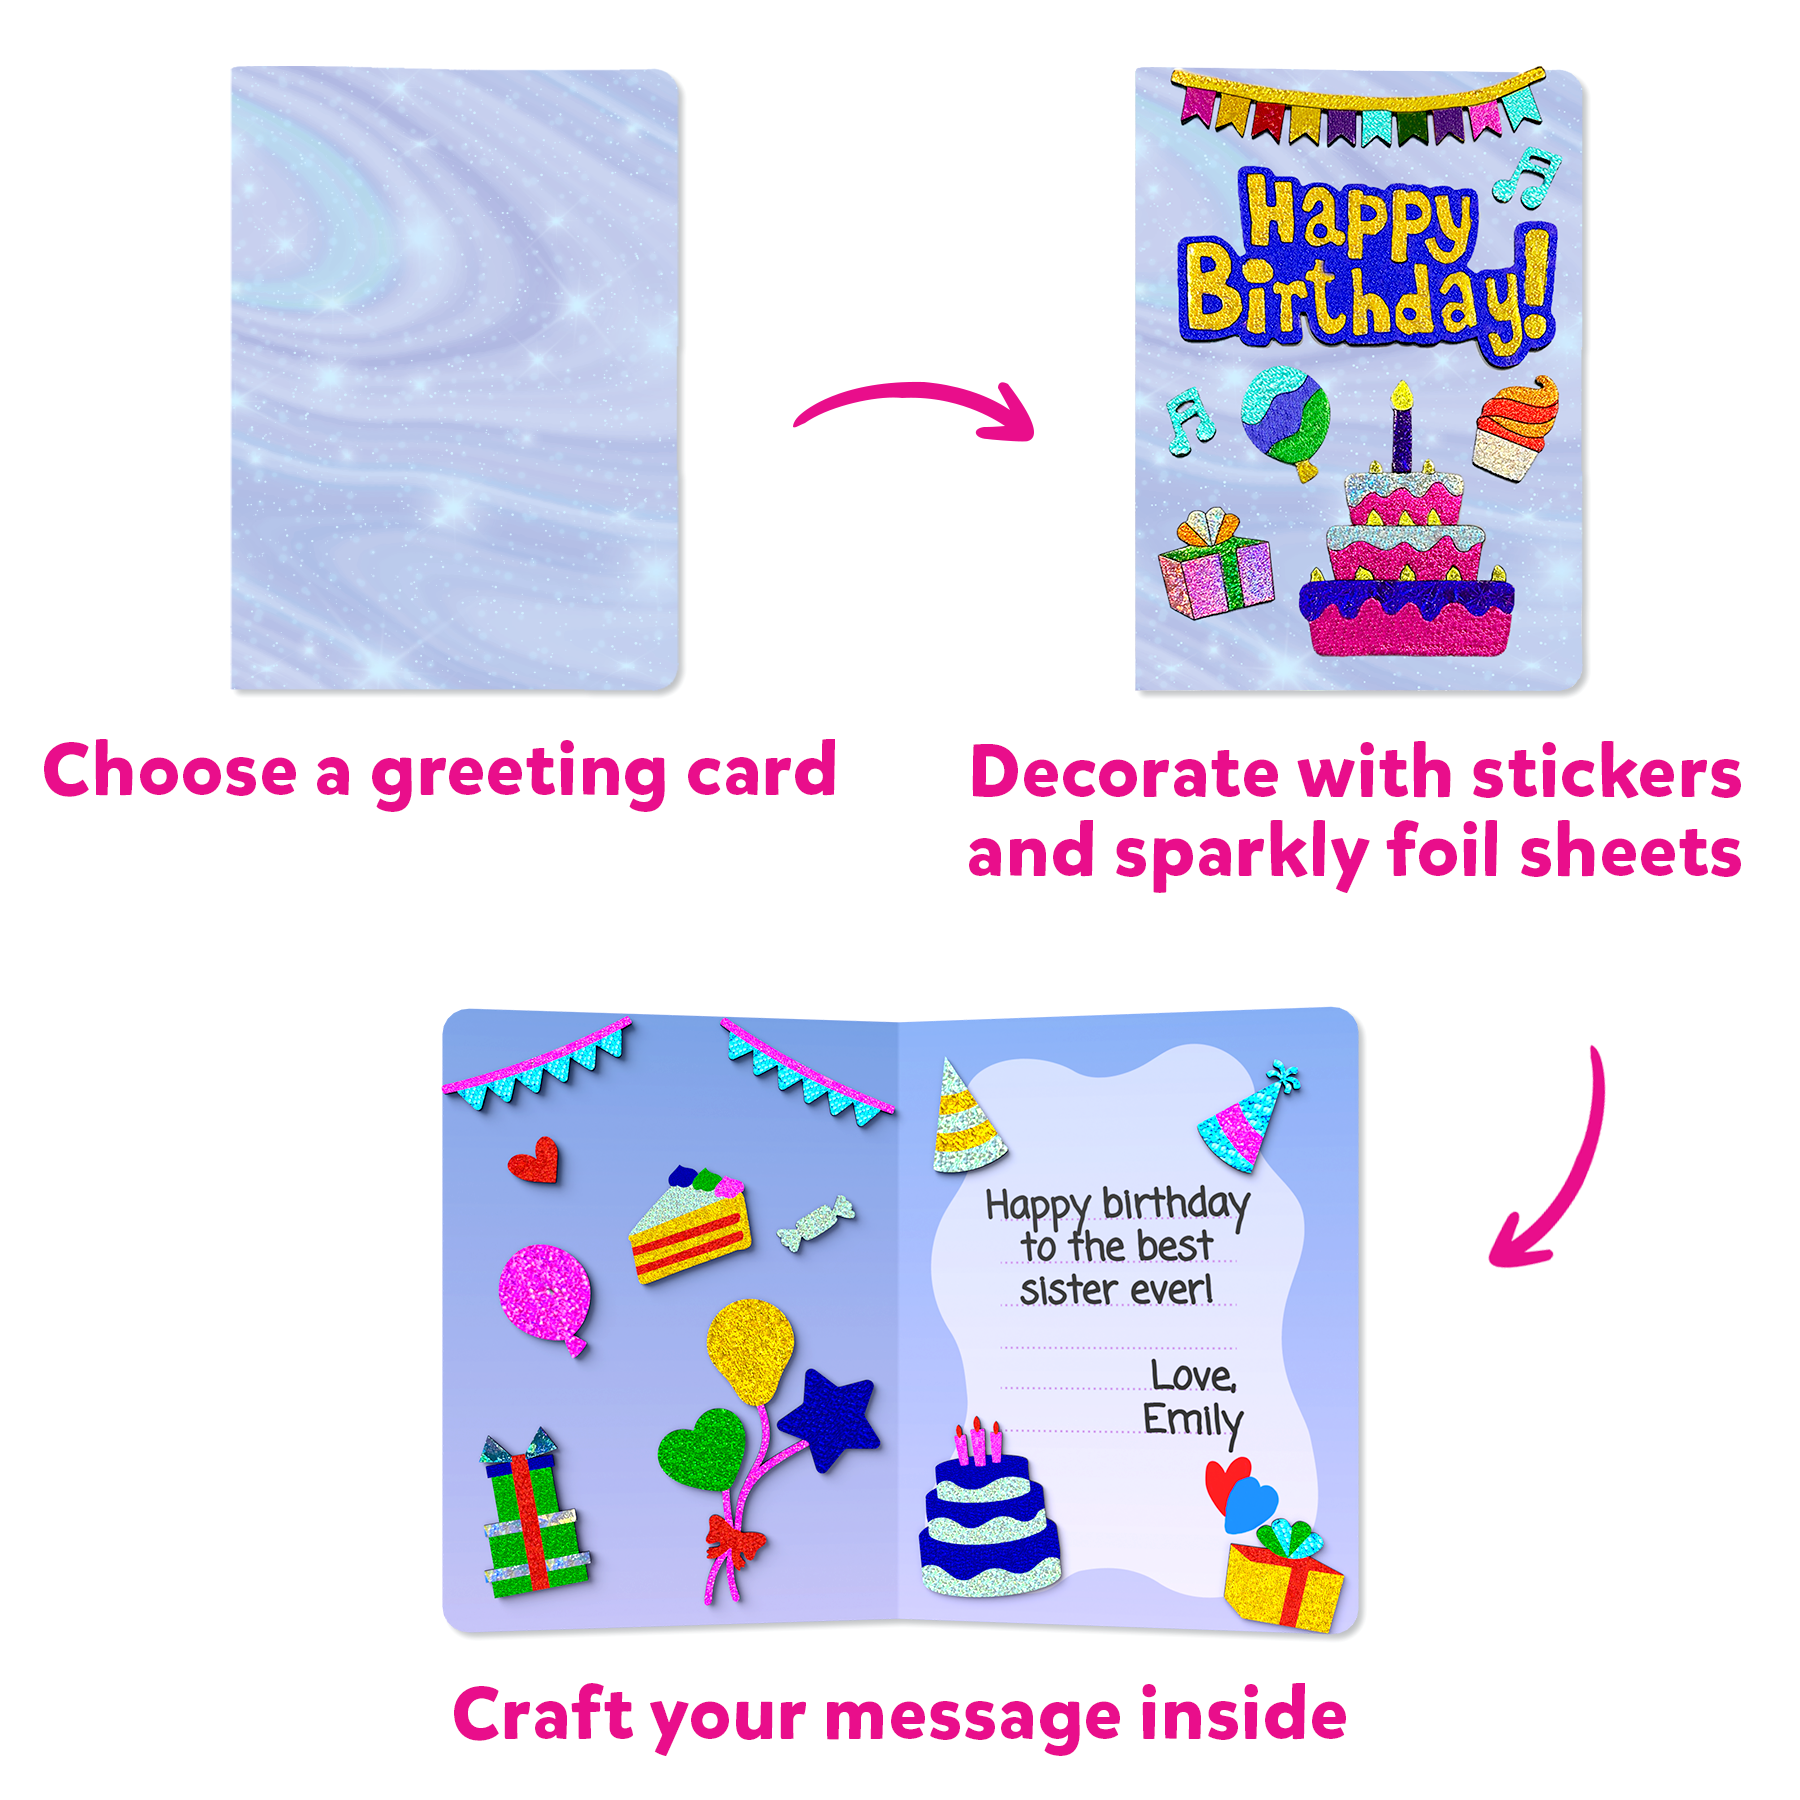 Skillmatics Art & Craft Activity - Foil Fun Card Making Set, No Mess Art for Kids, Craft Kits & Supplies, DIY Creative Activity, Gifts for Girls & Boys Ages 4, 5, 6, 7, 8, 9, Travel Toys